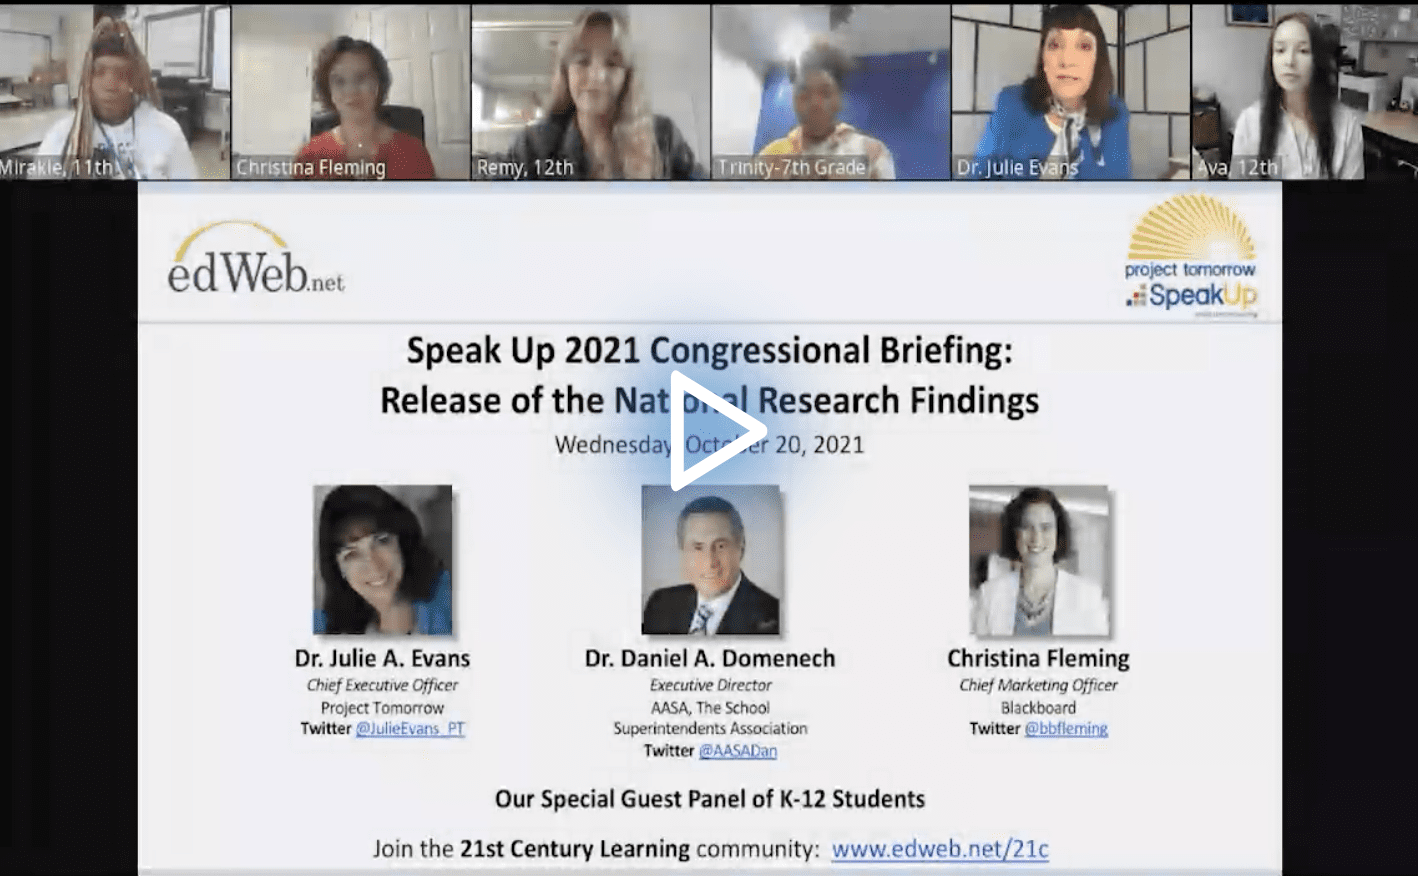 Speak Up 2021 Congressional Briefing: Release of the National Research Findings edLeader Panel recording link